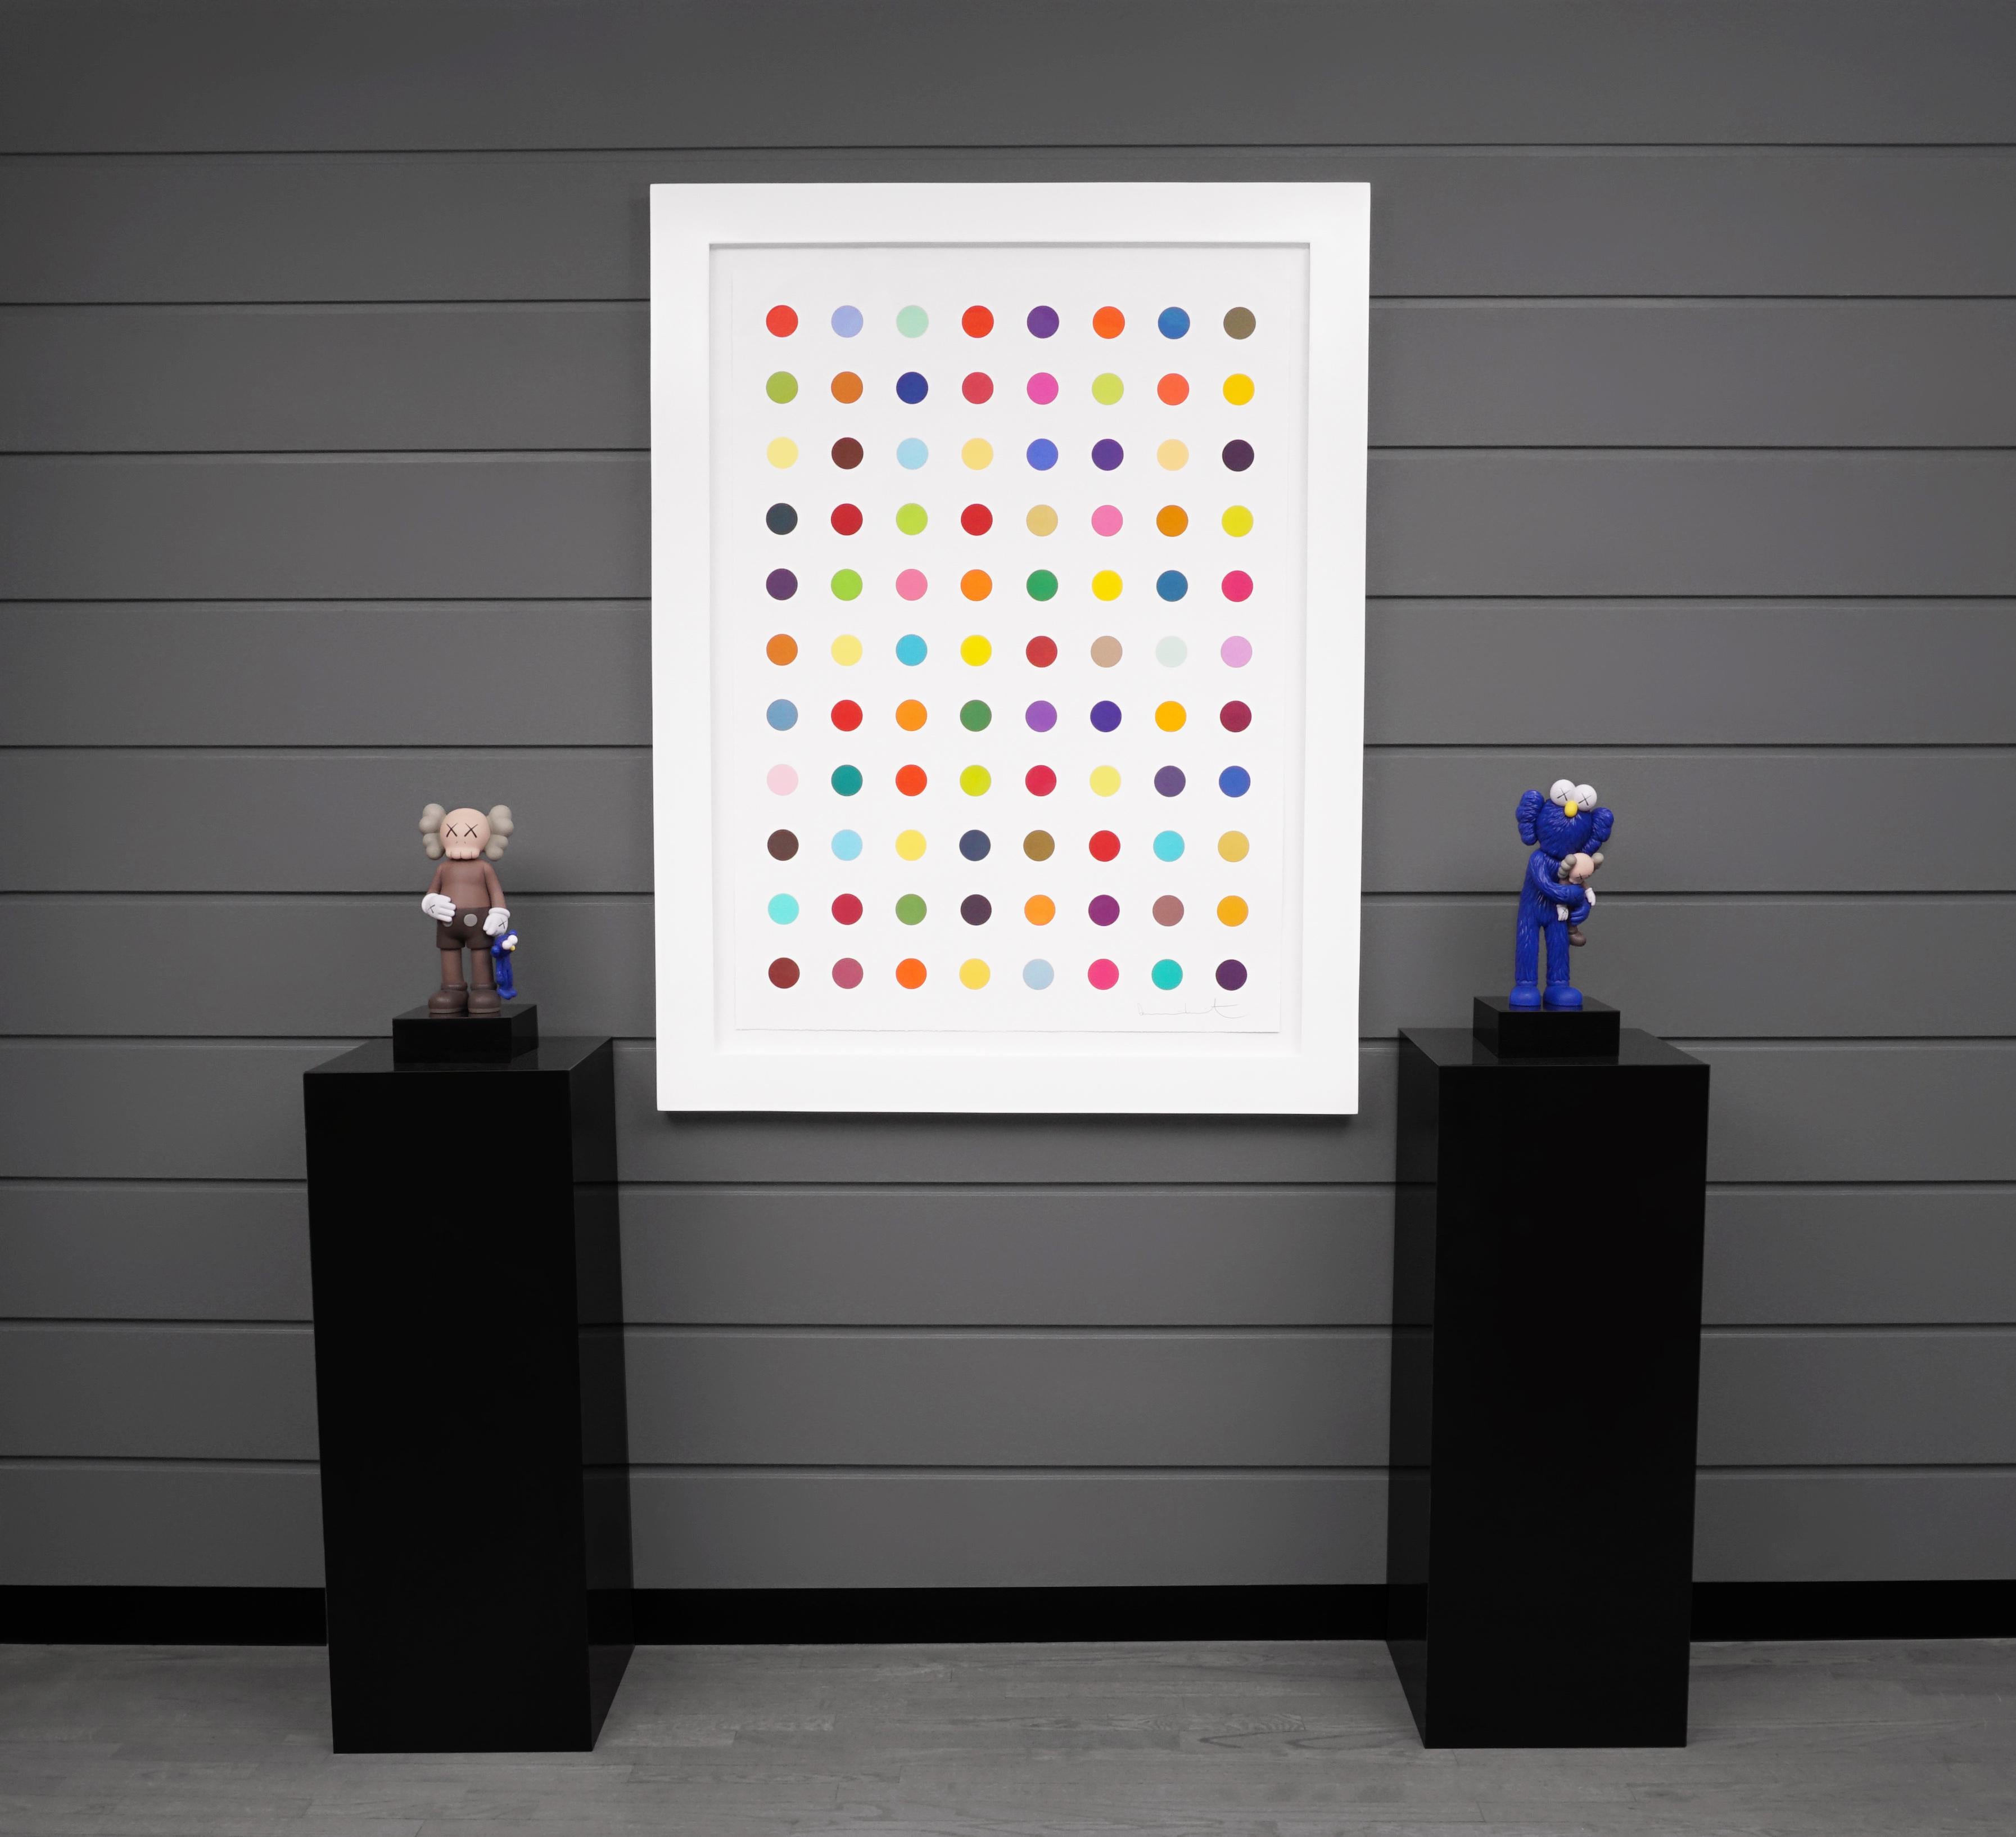 The contemporary pop-art Vertical 'Spots' III is an archival woodcut print on paper of the iconic 'Spots Series' by Damien Hirst. This minimalist blue chip artwork has a bright candy-color palette formed with series unique colors, in perfect linear